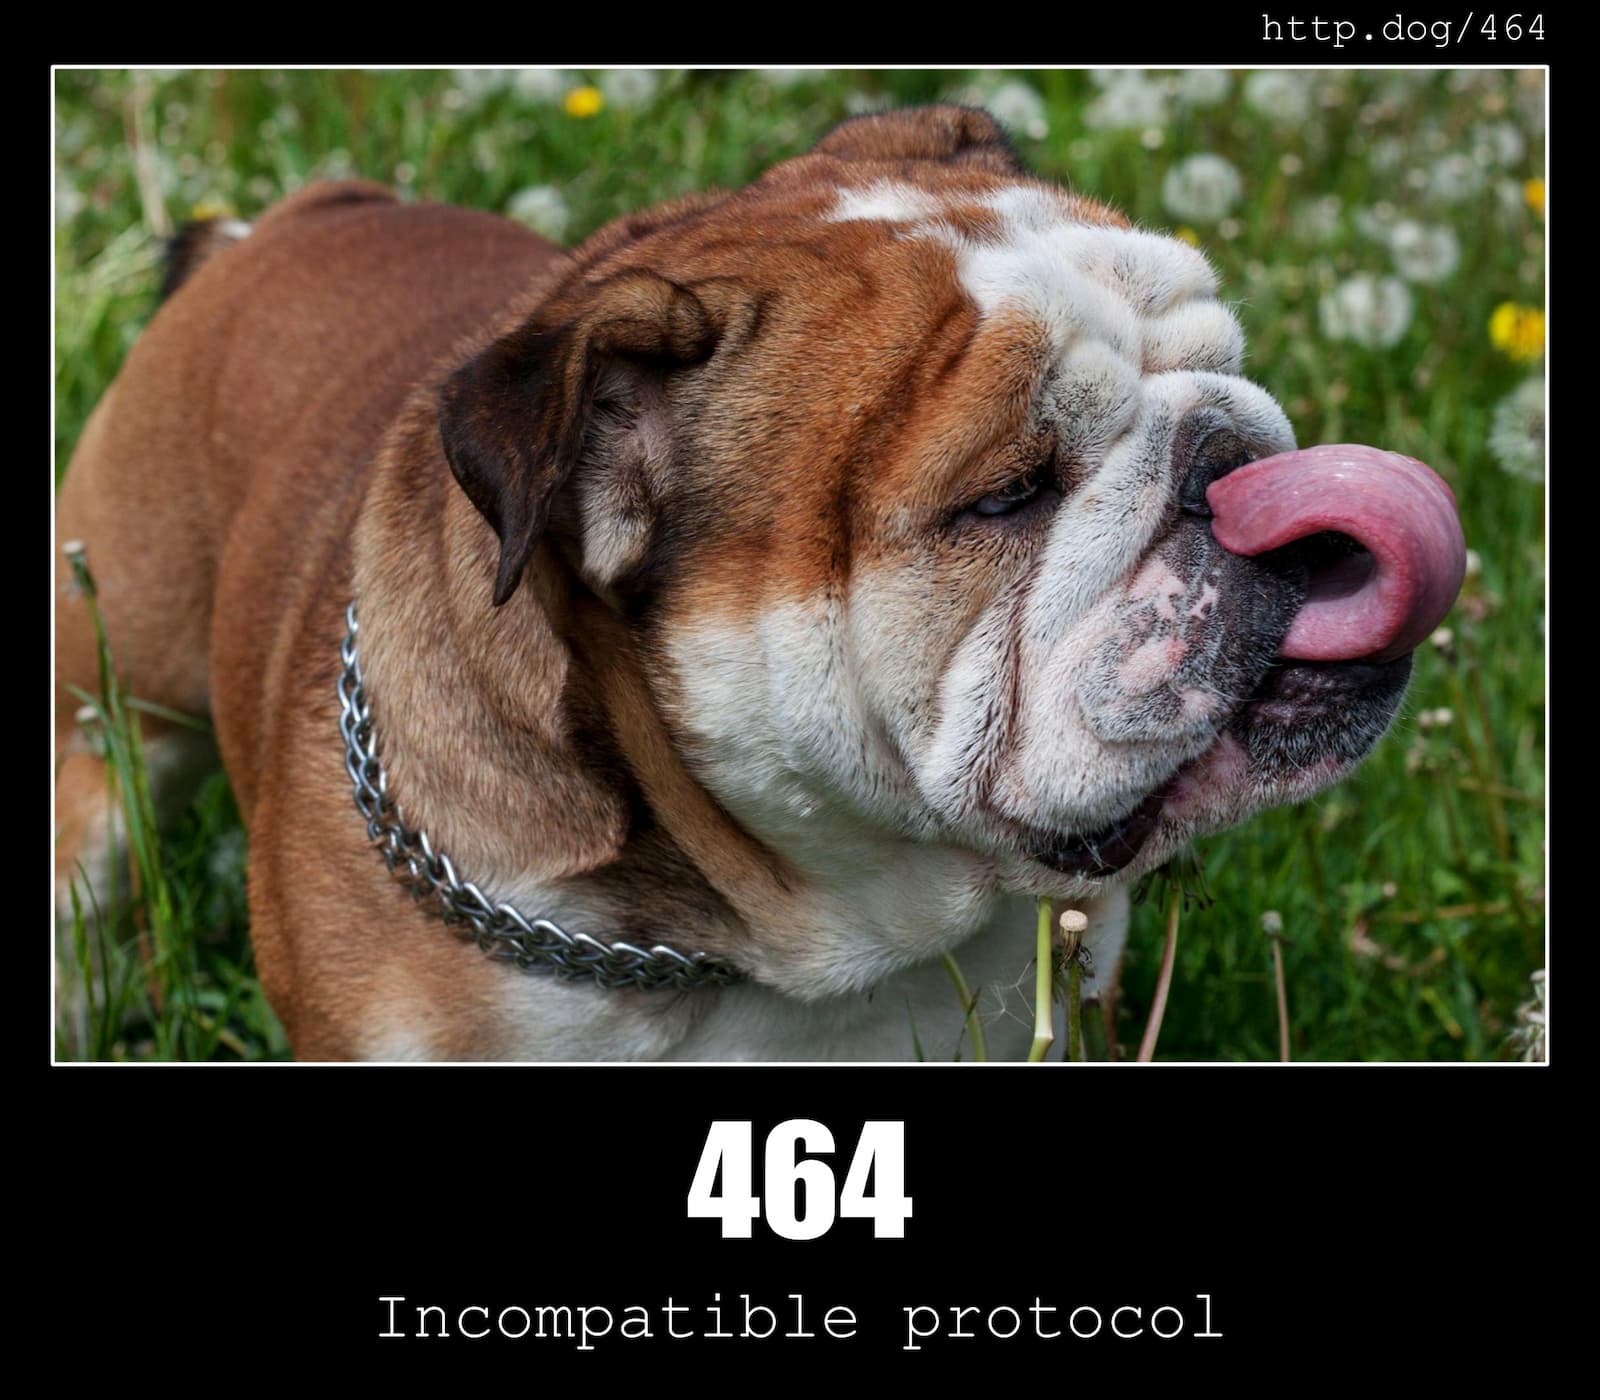 HTTP Status Code 464 Incompatible protocol & Dogs